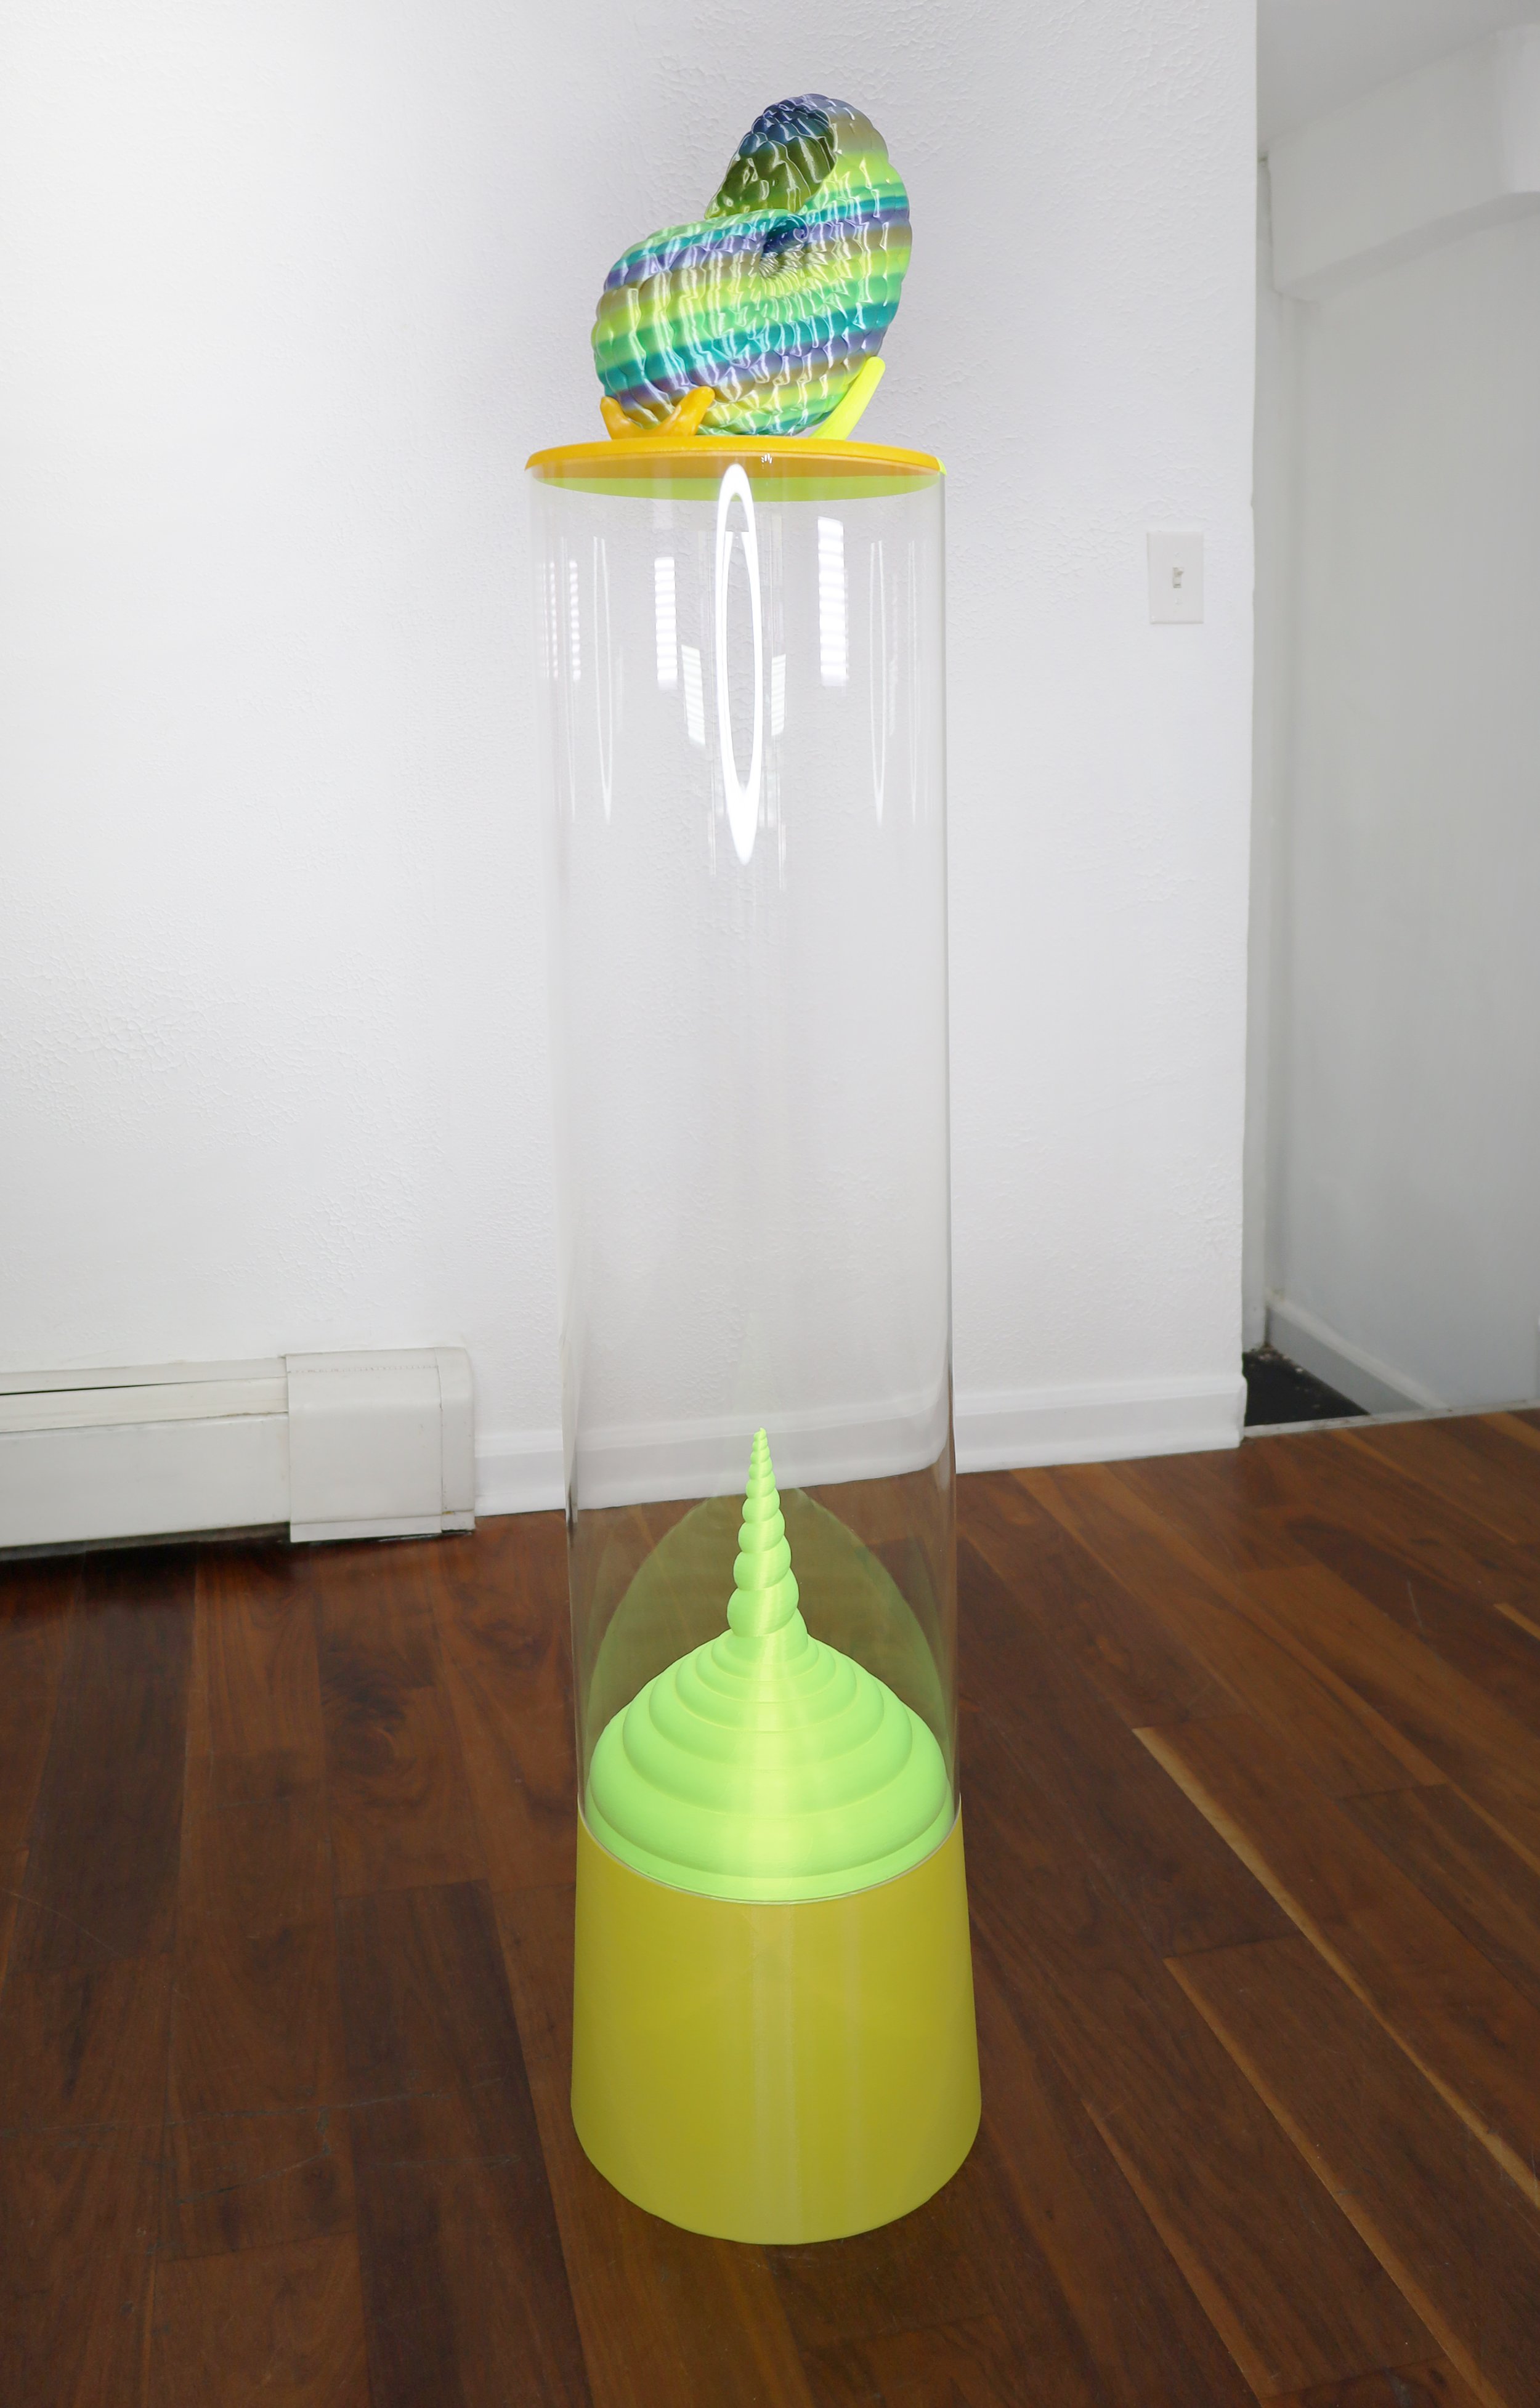  Gracelee Lawrence, untitled, 2022, 3D printed PLA plastic, acrylic tube, 55.25 x 12 x 12 inches, edition of 10 with 2 APs 